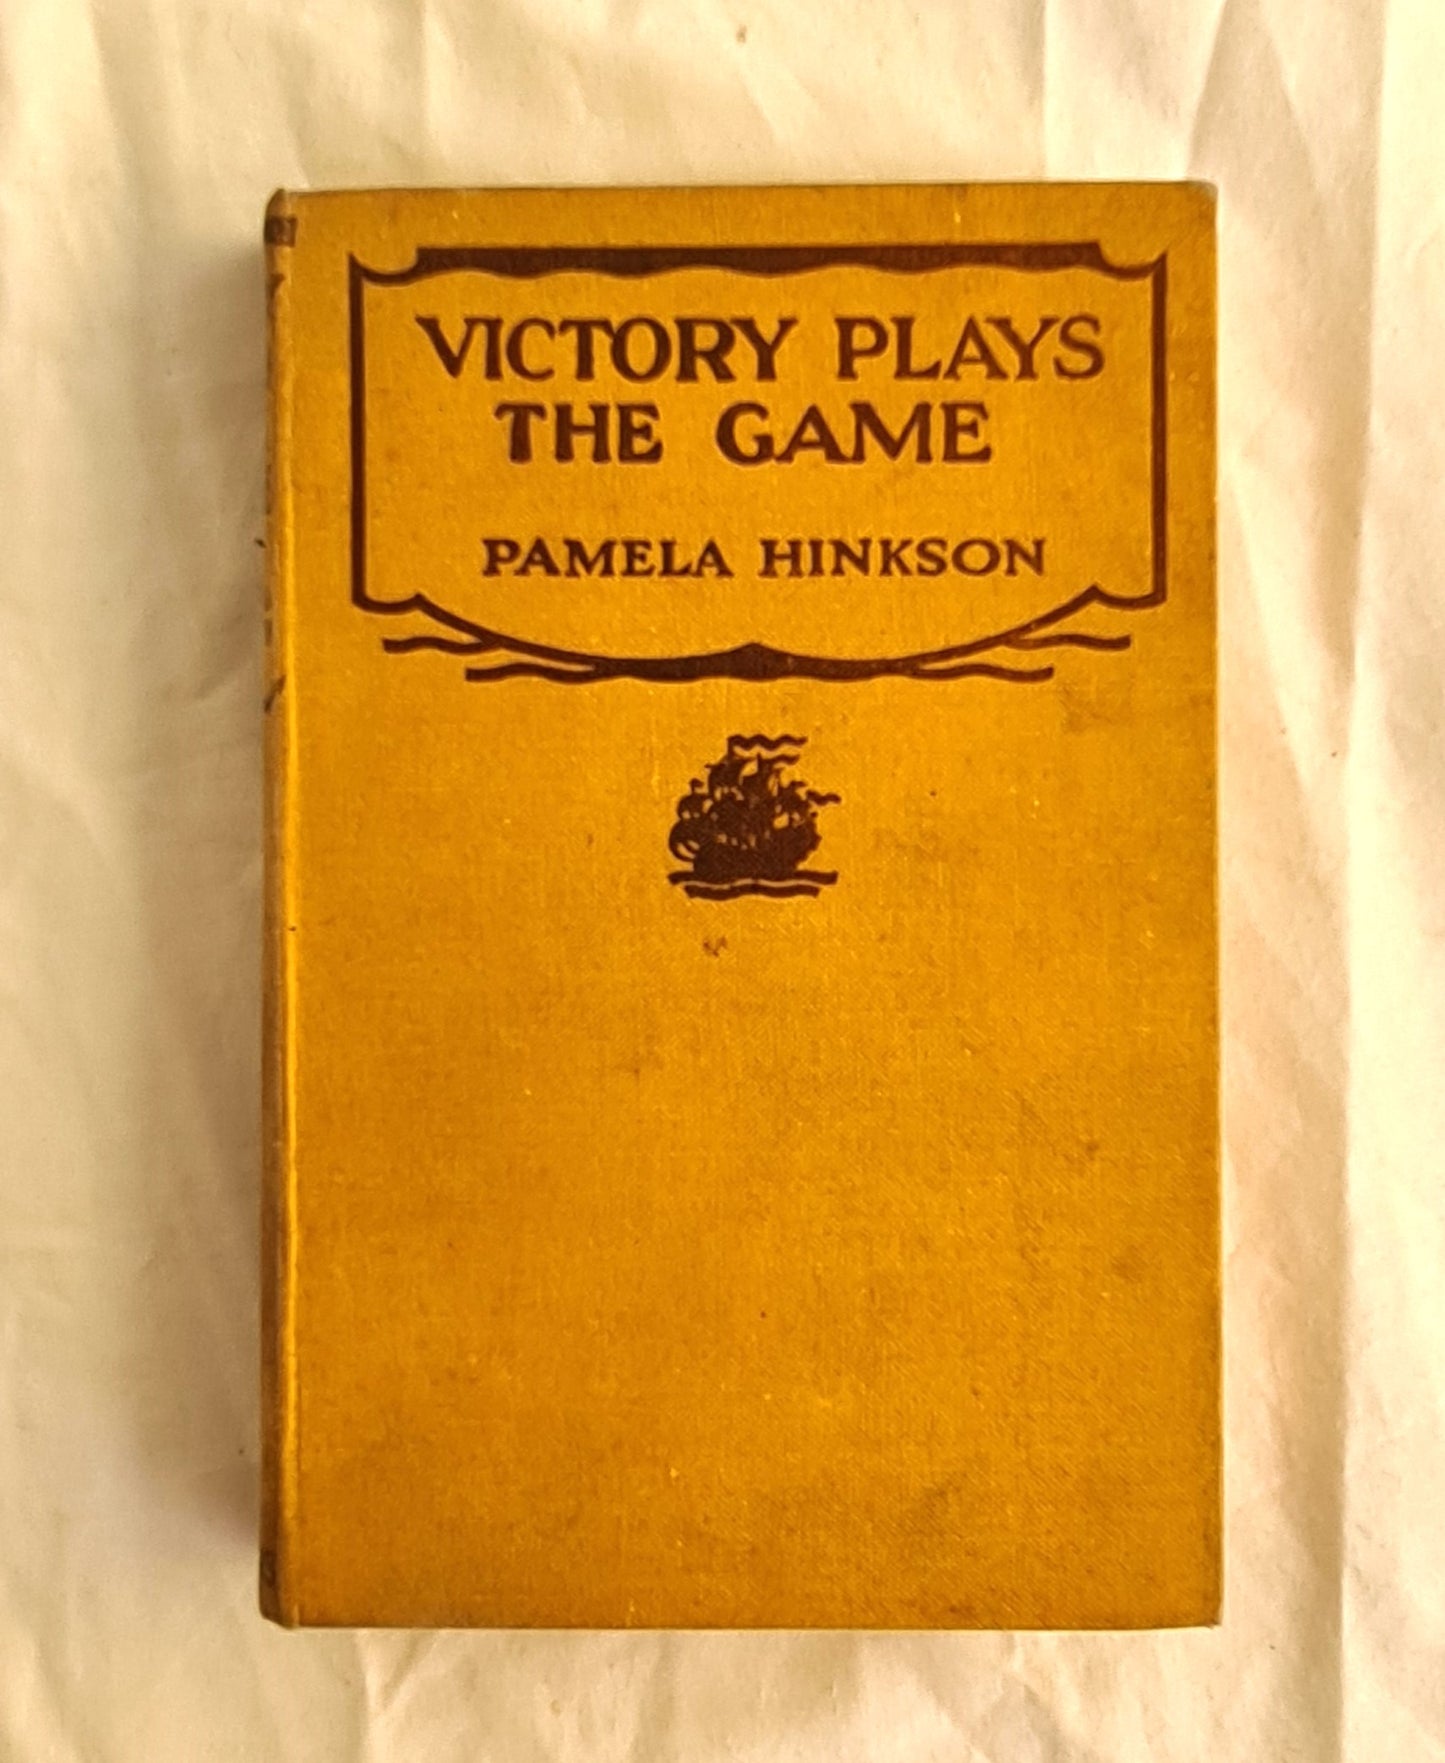 Victory Plays the Game by Pamela Hinkson